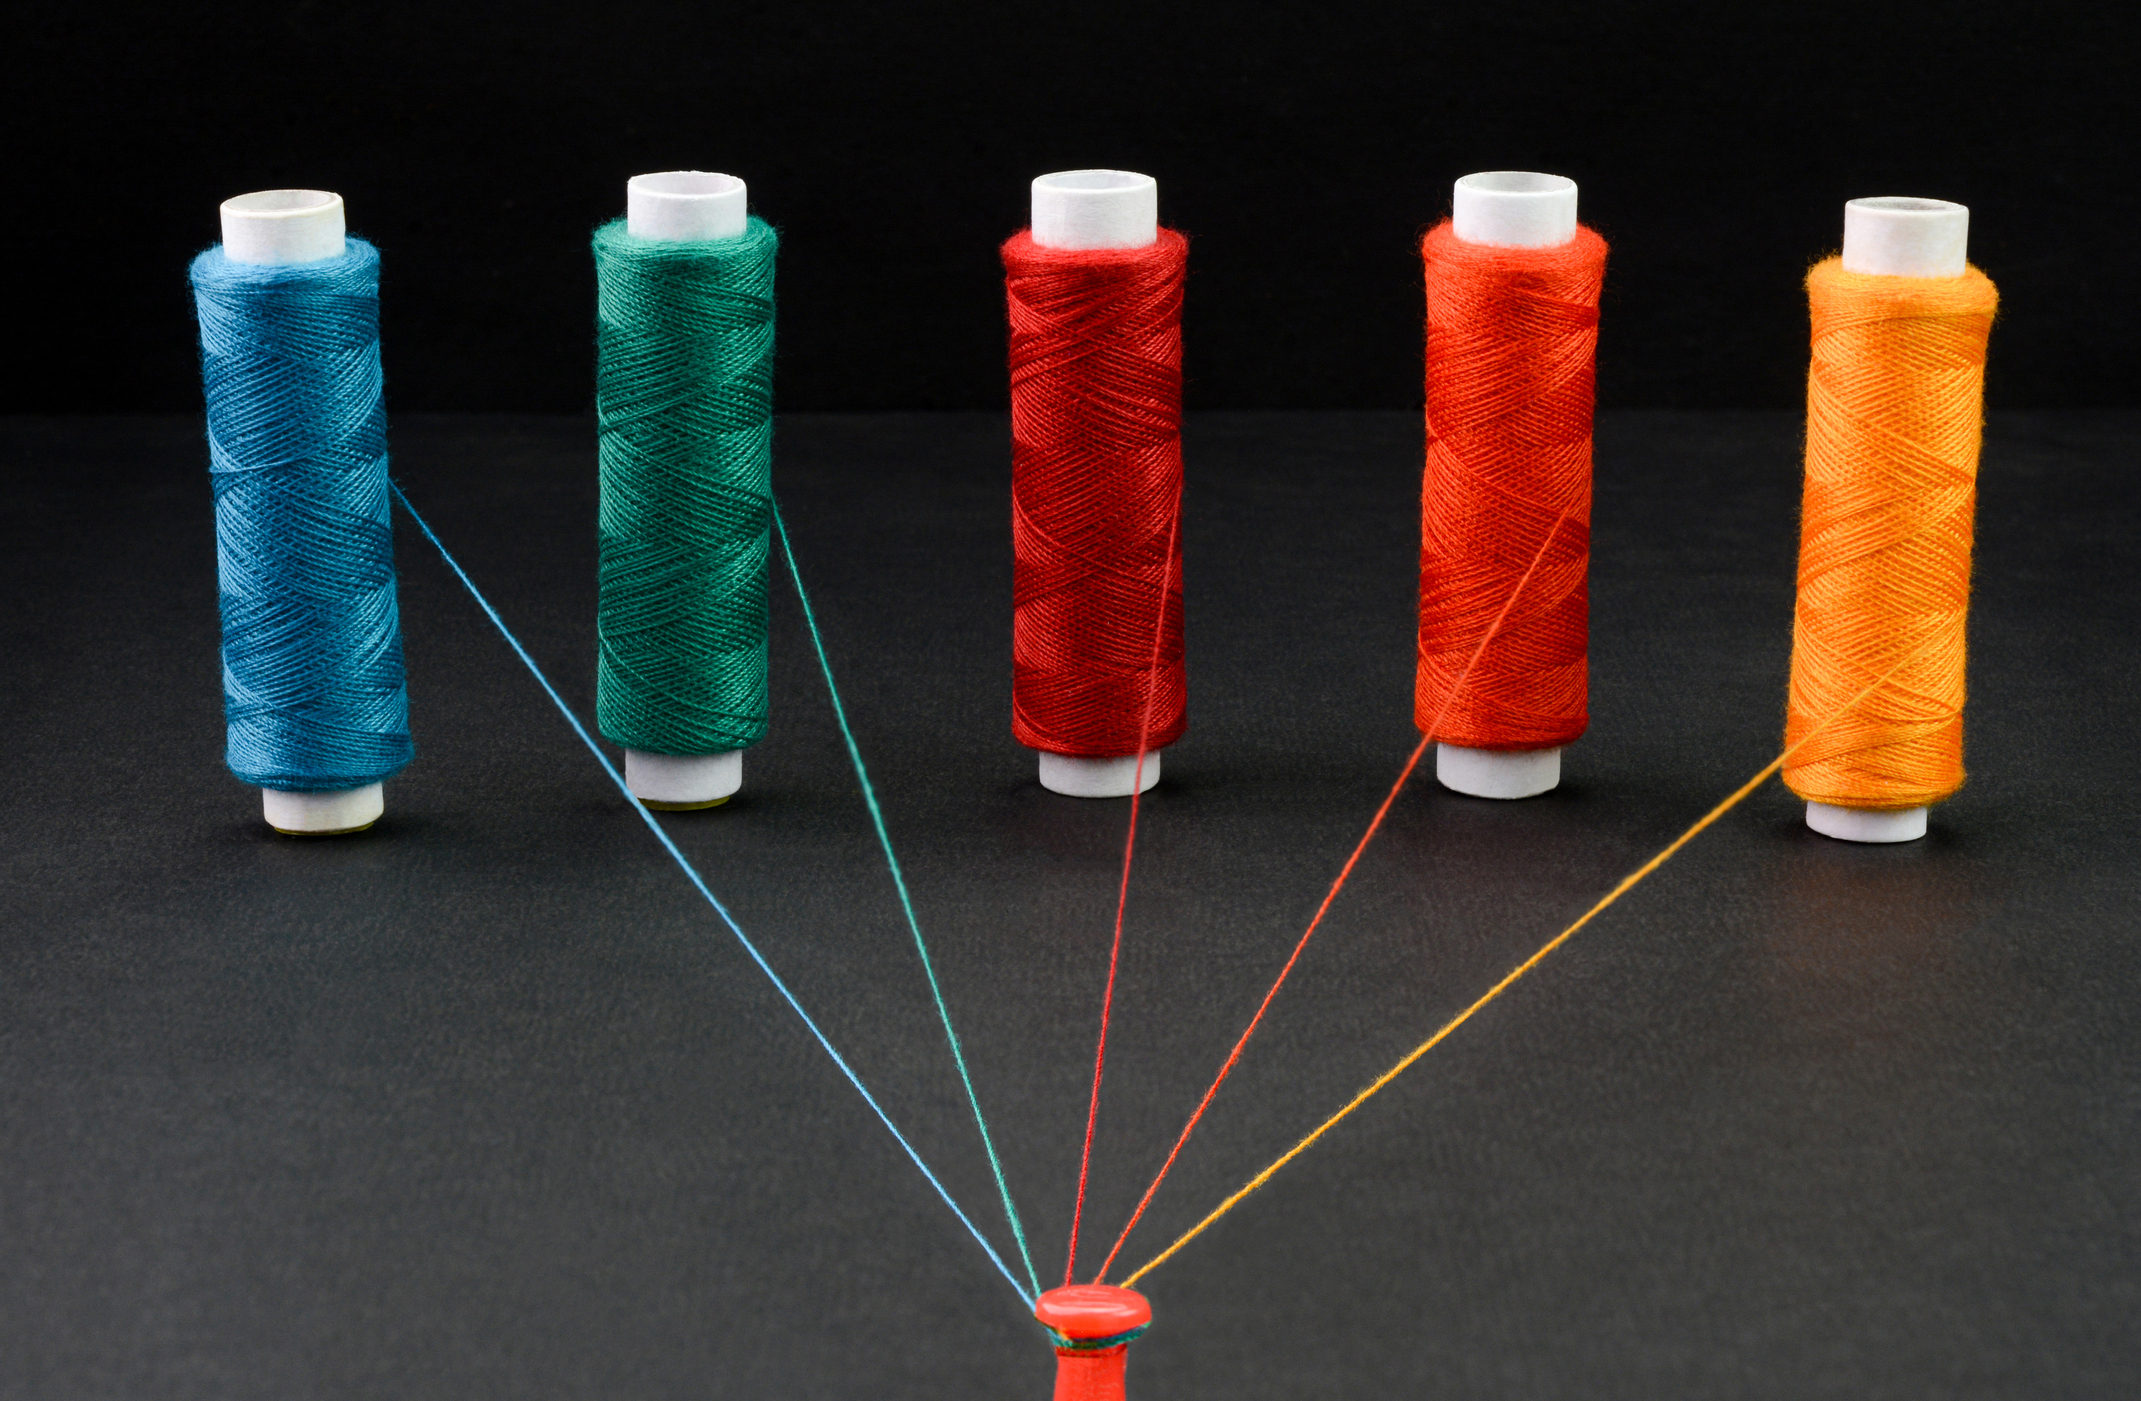 Multicolored strings attached together;  5 ways of risk management